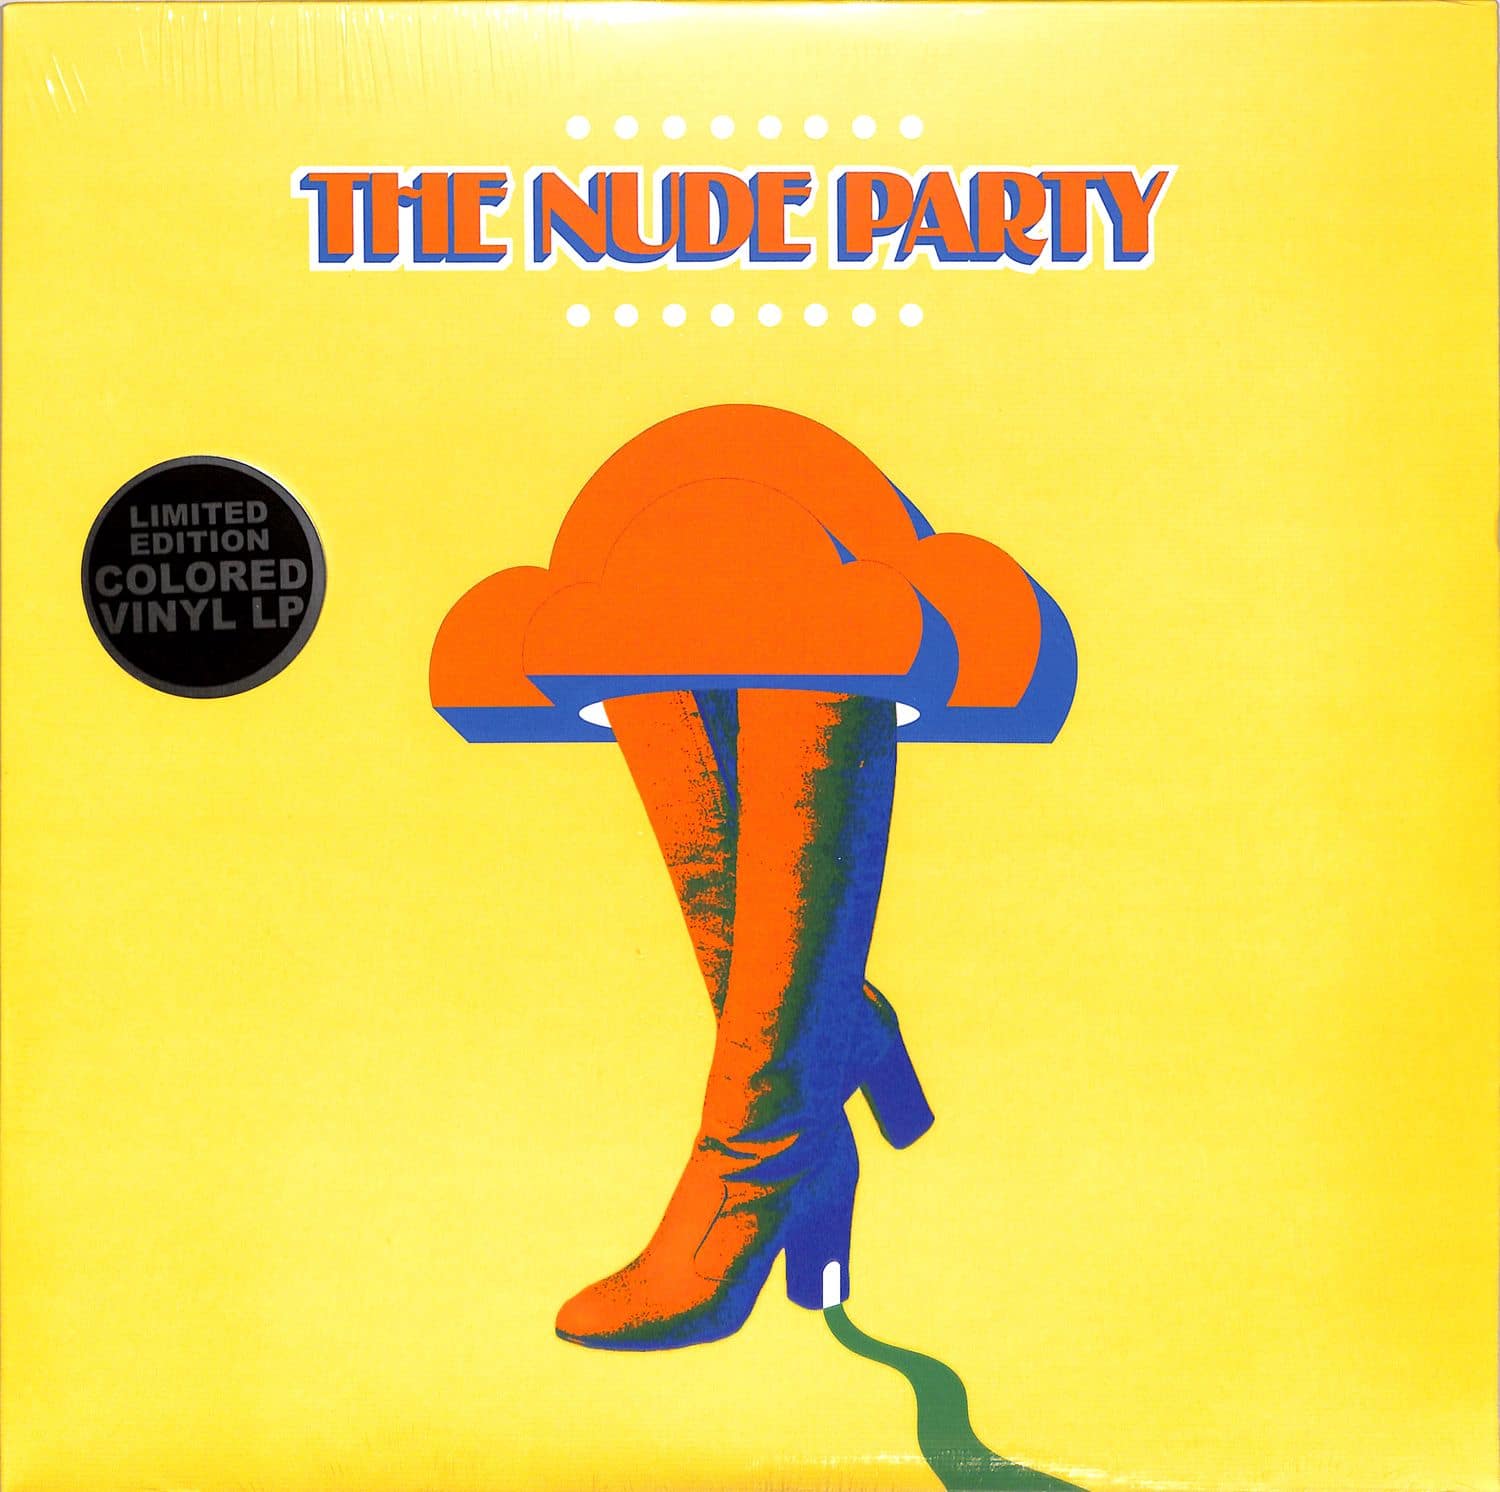 The Nude Party - THE NUDE PARTY 